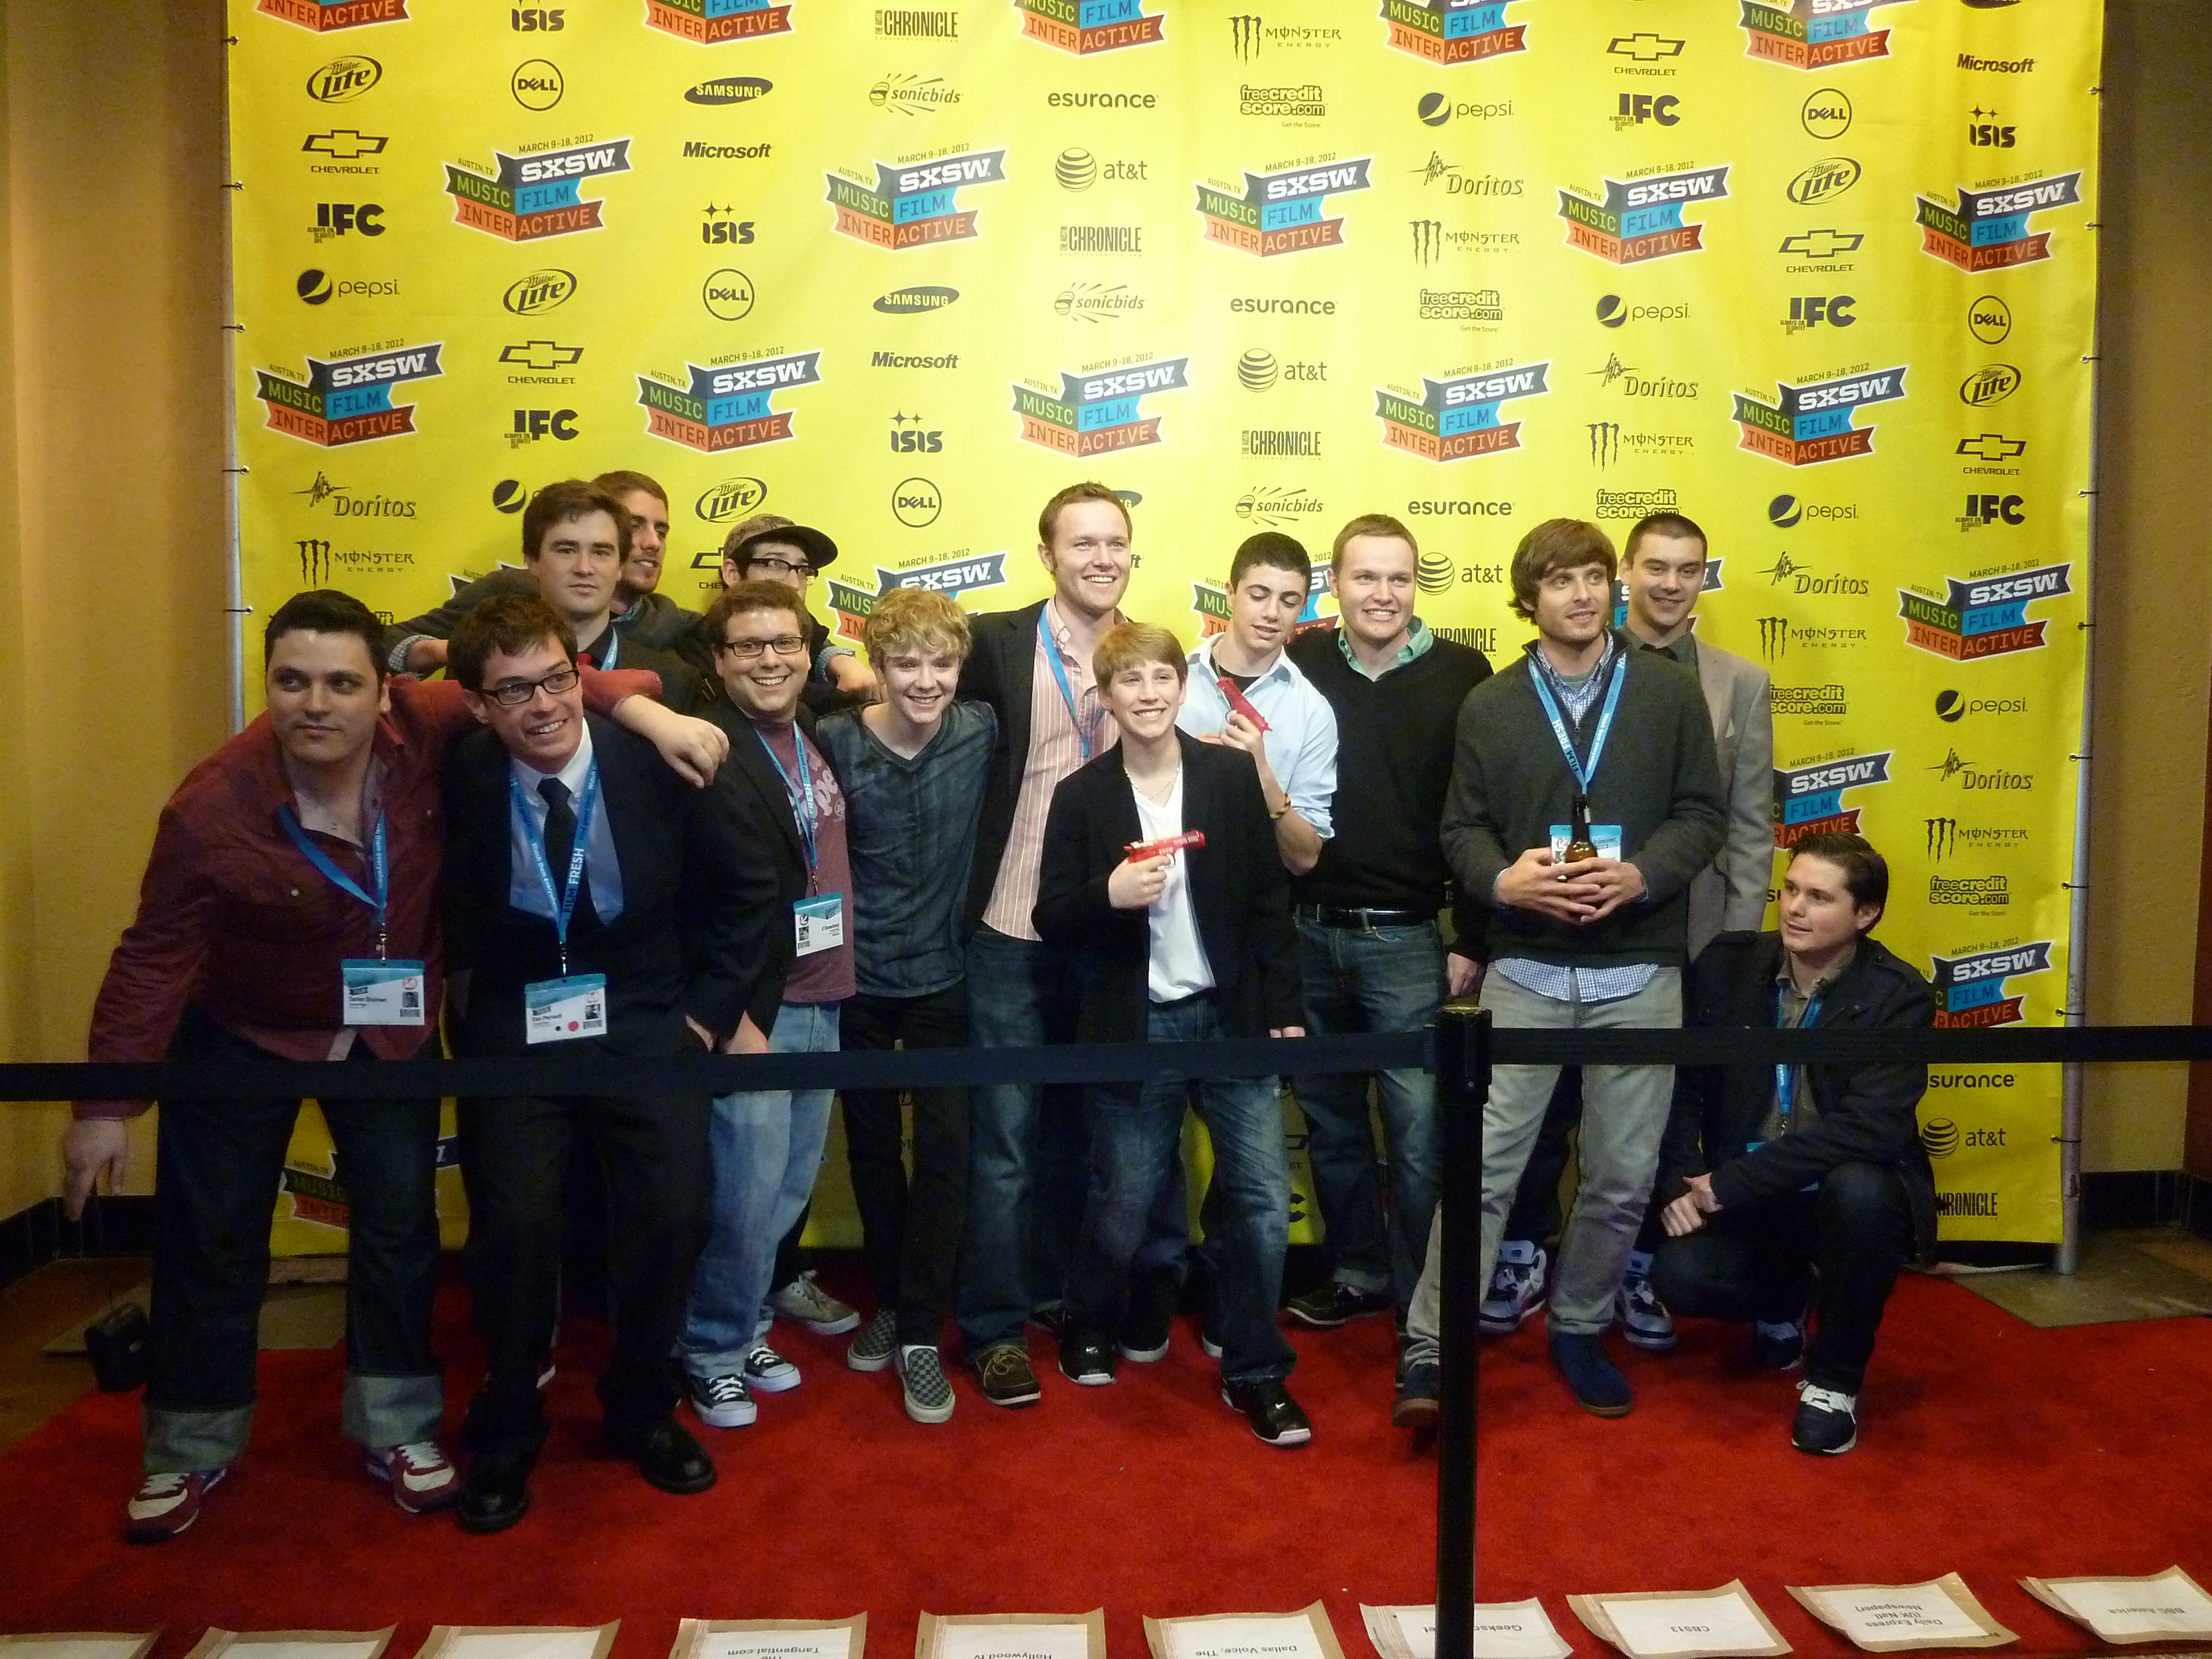 Funeral Kings World Premiere at South by Southwest Film Festival